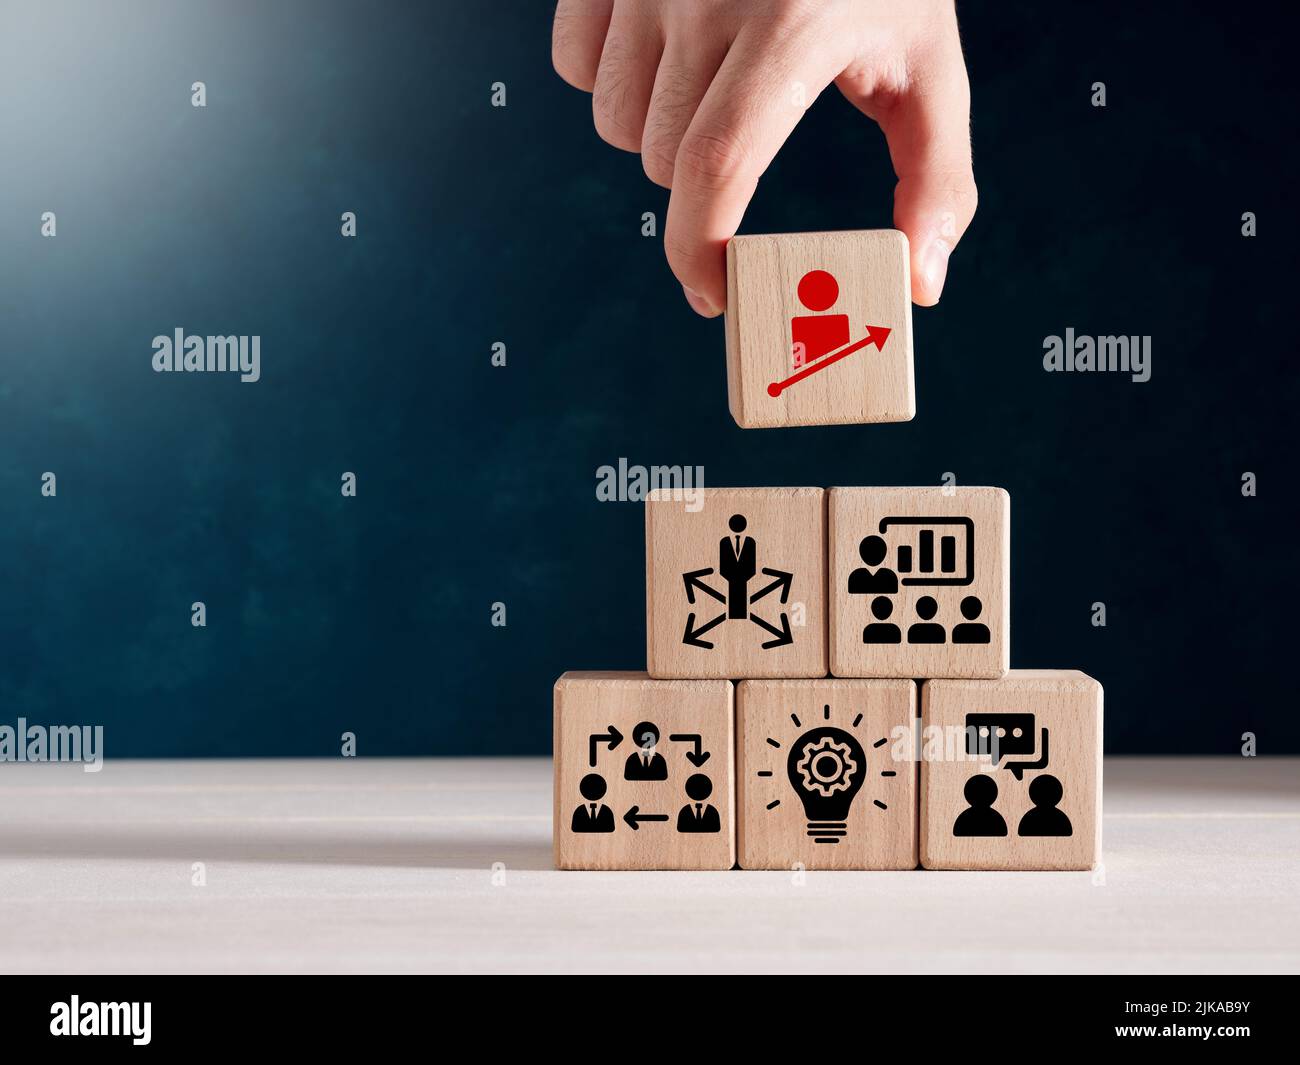 Business personal development, improving and developing competency and business performance. Hand holds wooden cubes with personal growth icon on stac Stock Photo